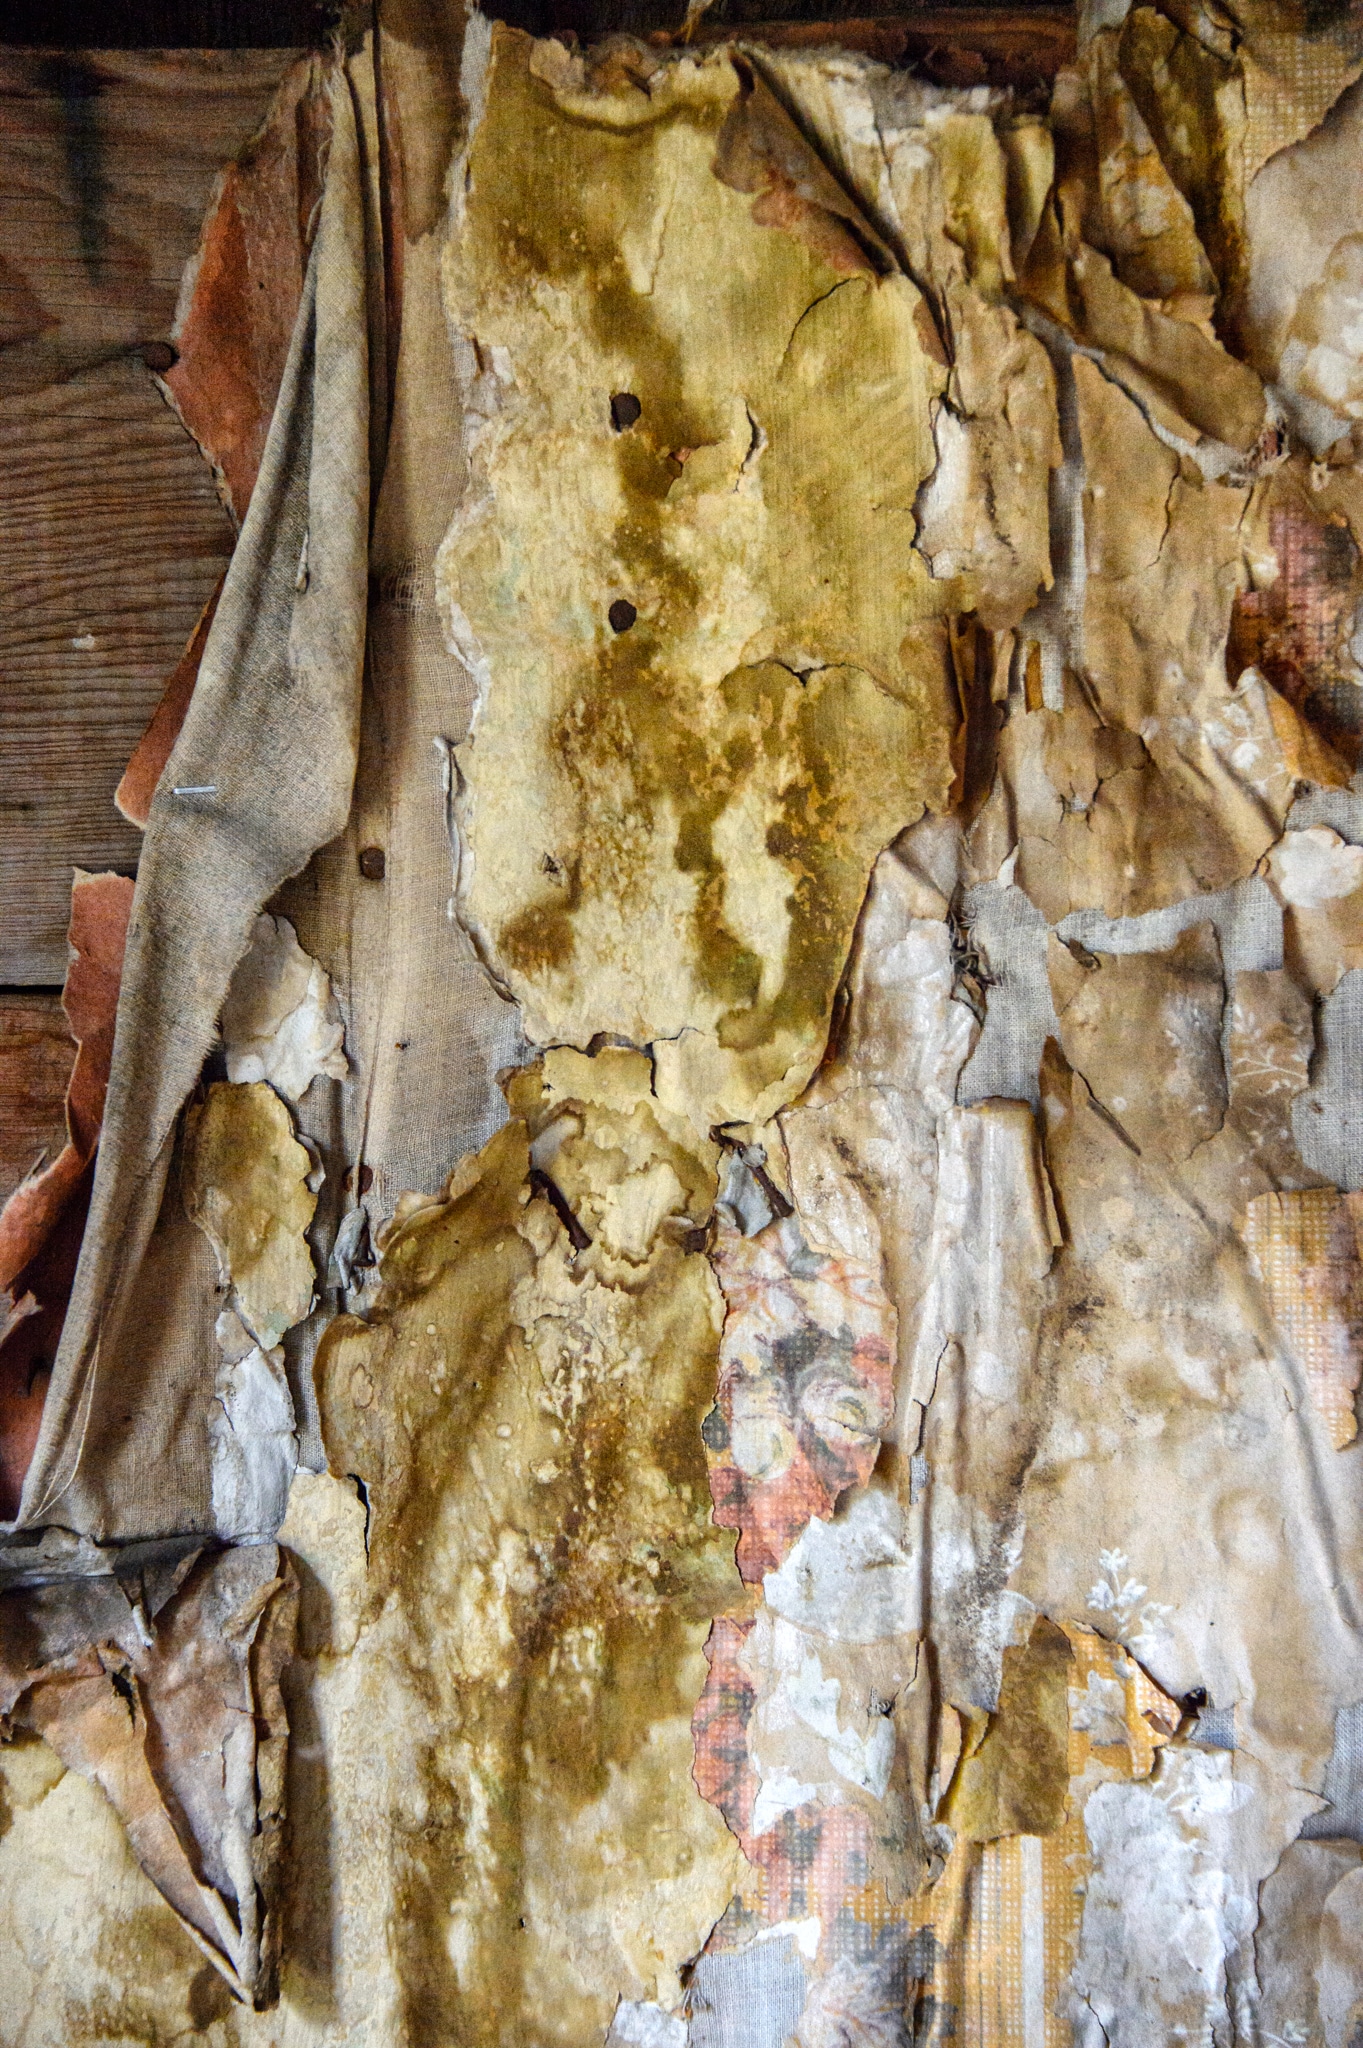 This is a close-up view of old wood and other materials covering the interior of a structure located in the Animas Forks townsite, northest of Silverton, Colorado, on San Juan County Road 2 near the Alpine Loop.